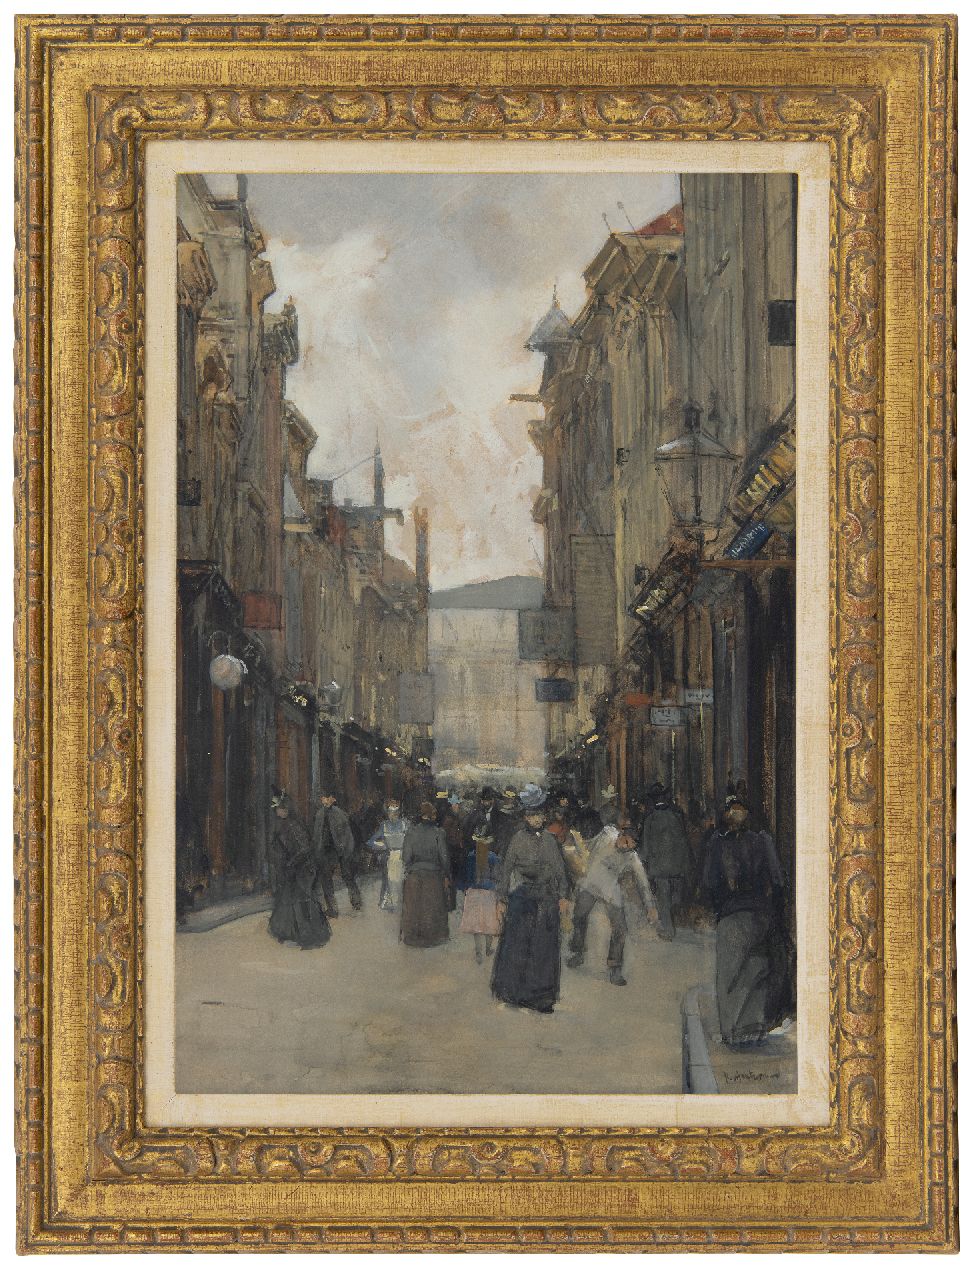 Arntzenius P.F.N.J.  | Pieter Florentius Nicolaas Jacobus 'Floris' Arntzenius | Watercolours and drawings offered for sale | A busy Spuistraat in The Hague, watercolour and gouache on paper 50.1 x 33.9 cm, signed l.r.